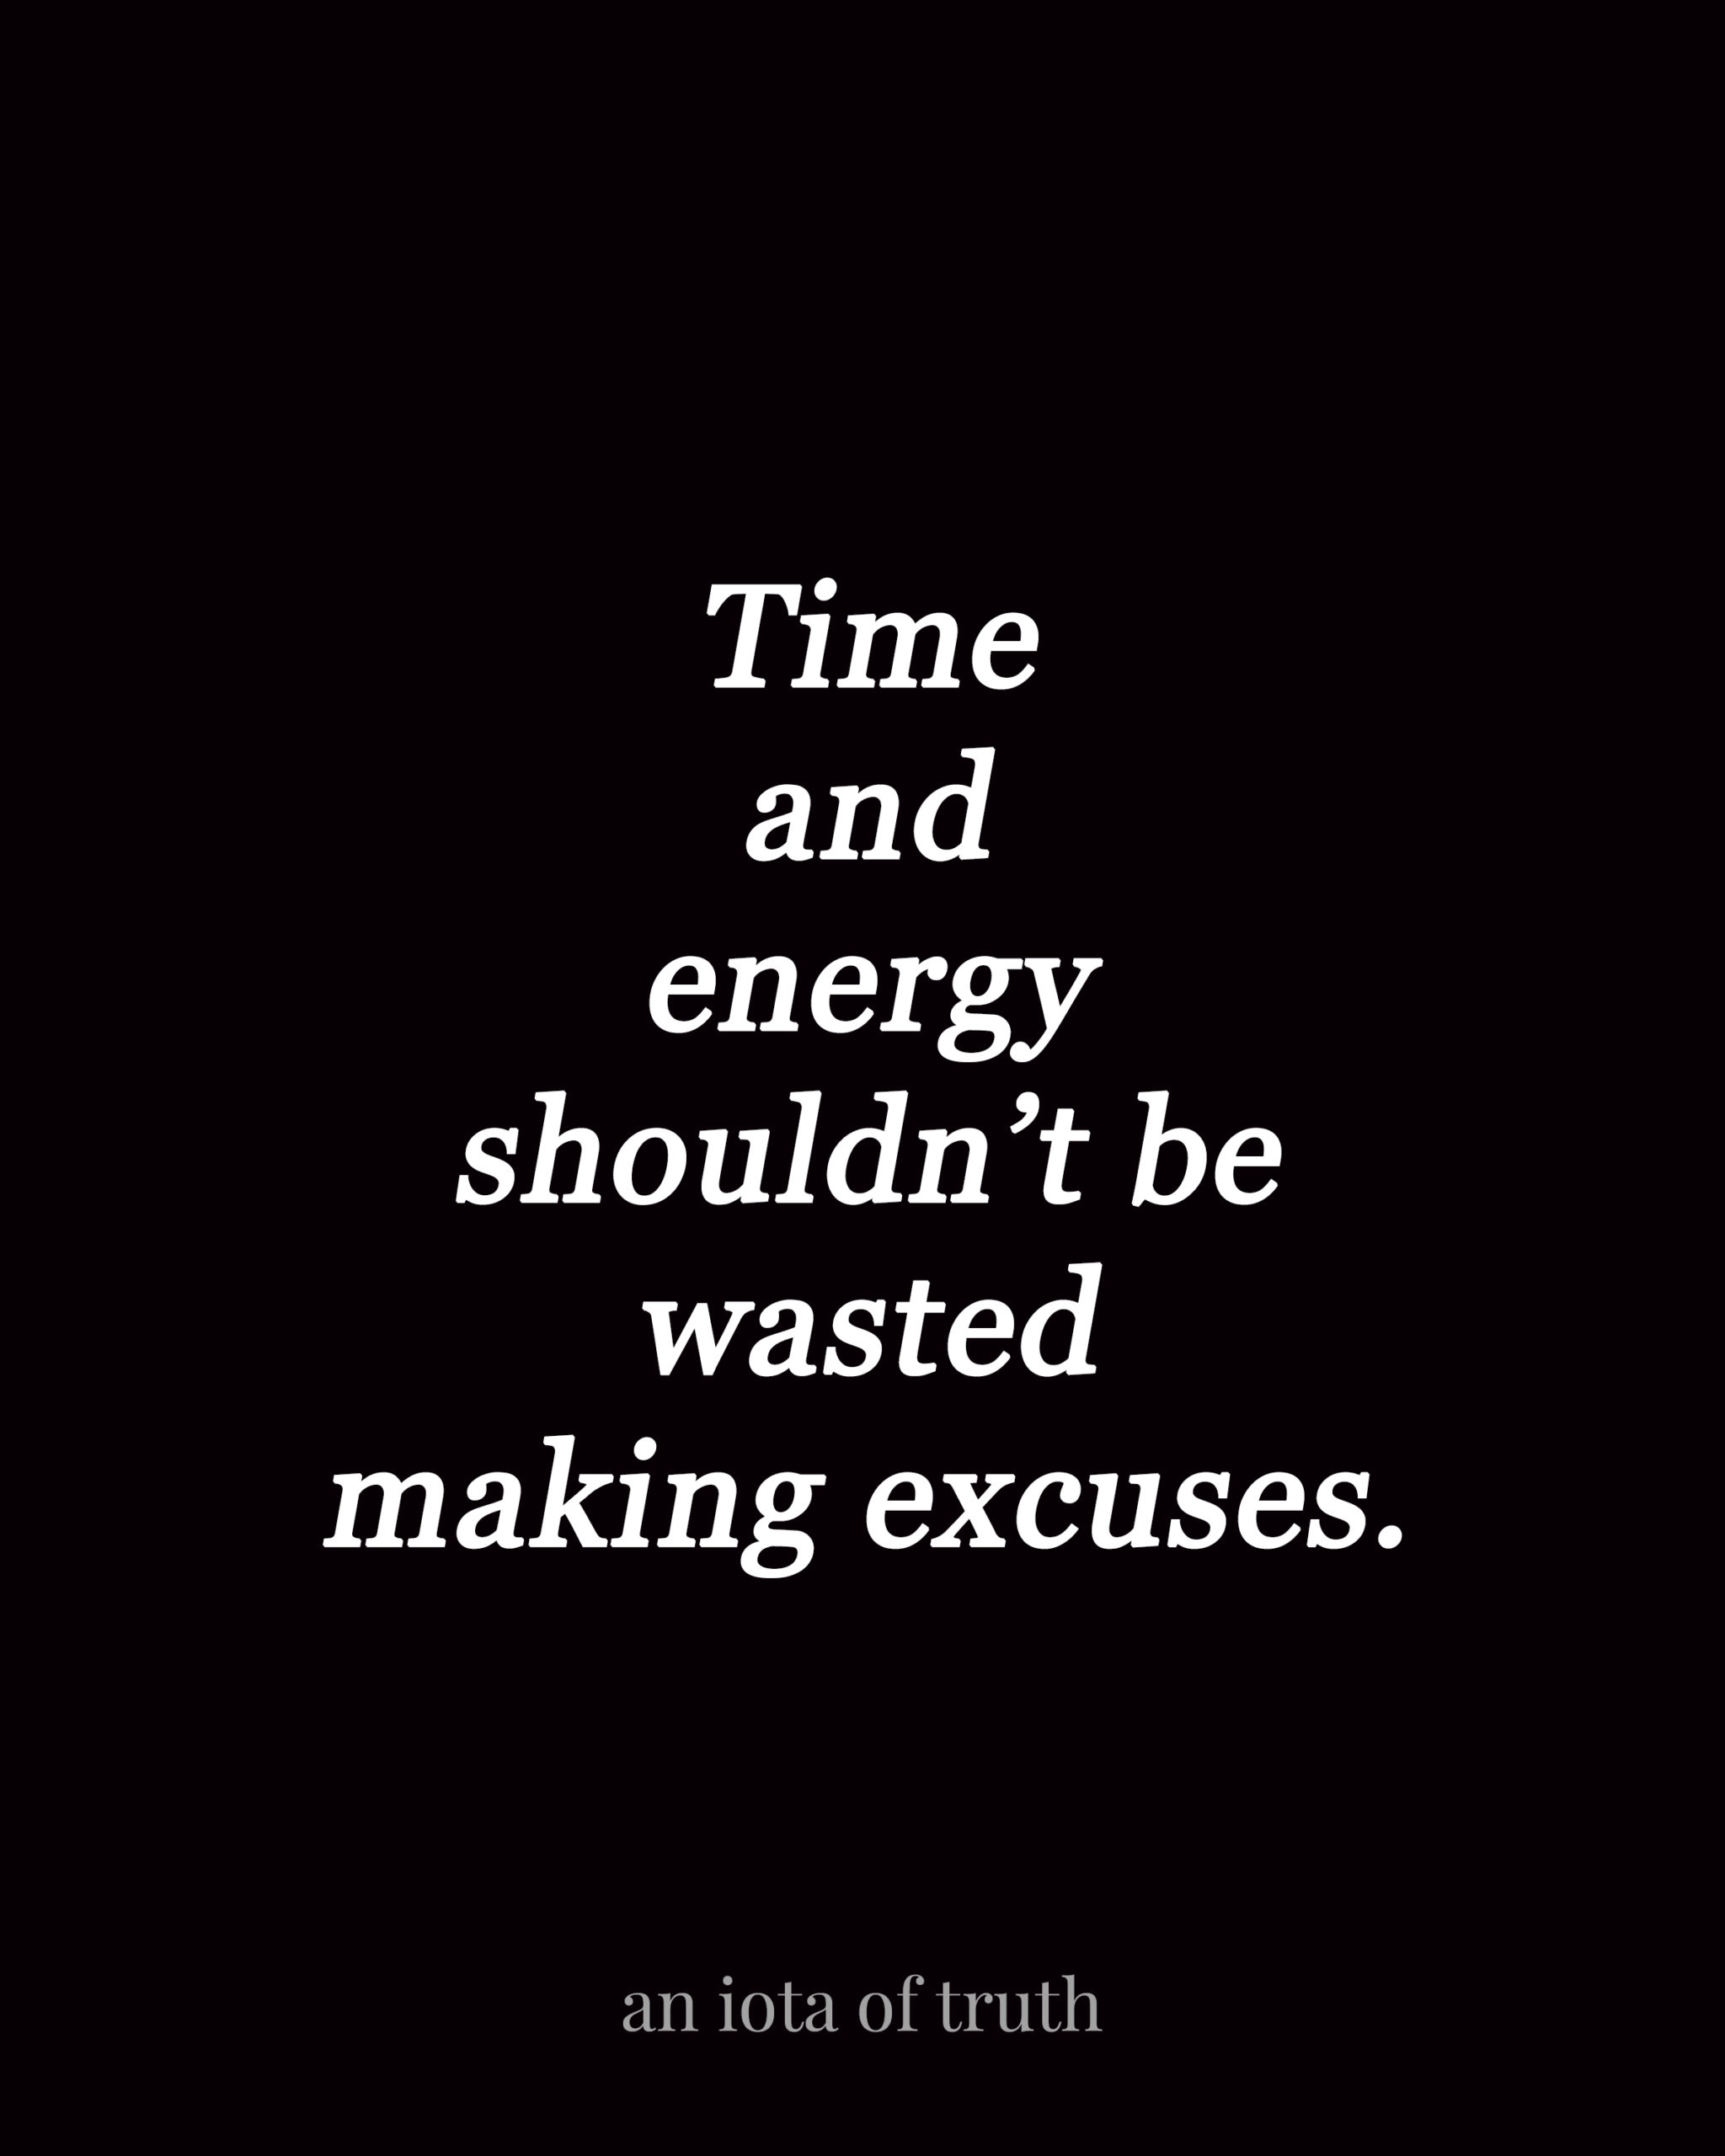 Time and energy shouldn't be wasted making excuses.